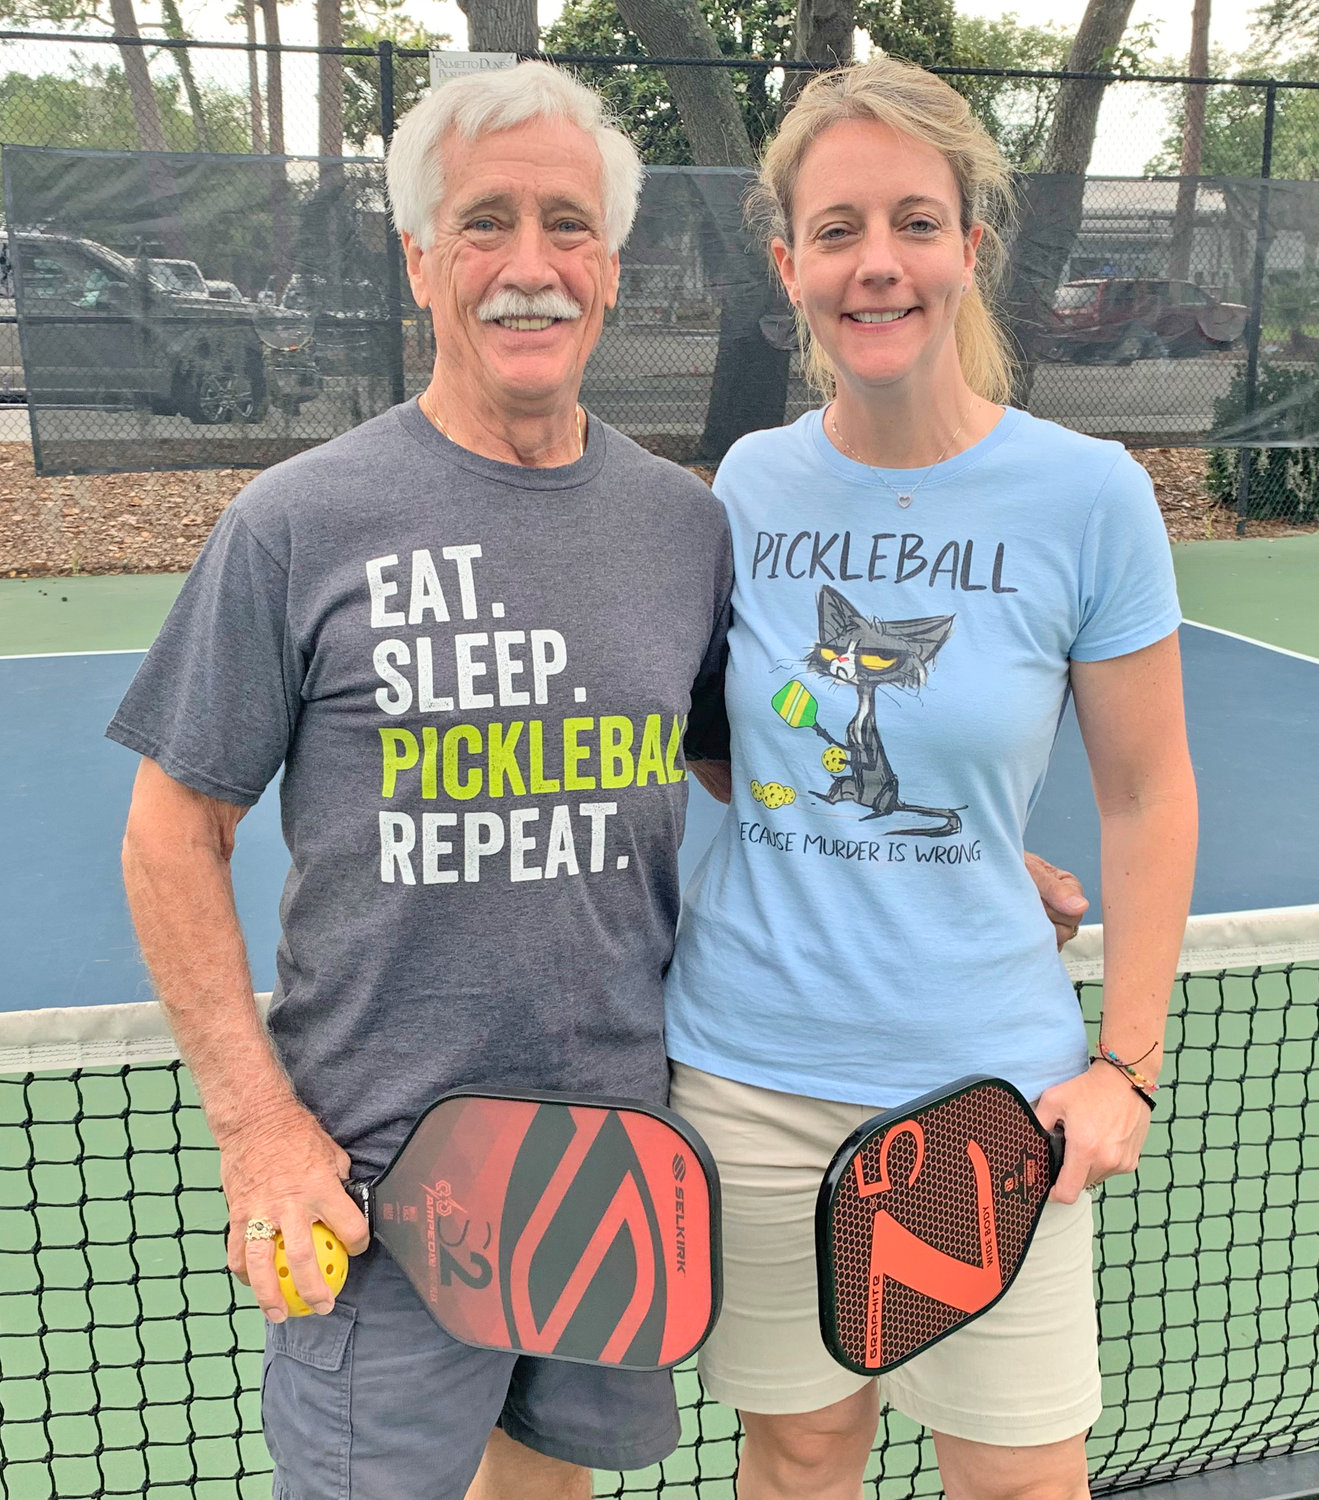 Grandmaster Clifford Crandall Jr. and his wife Amanda Crandall pose for a picture in the pickleball court during the Pickleball Nationals in South Carolina.